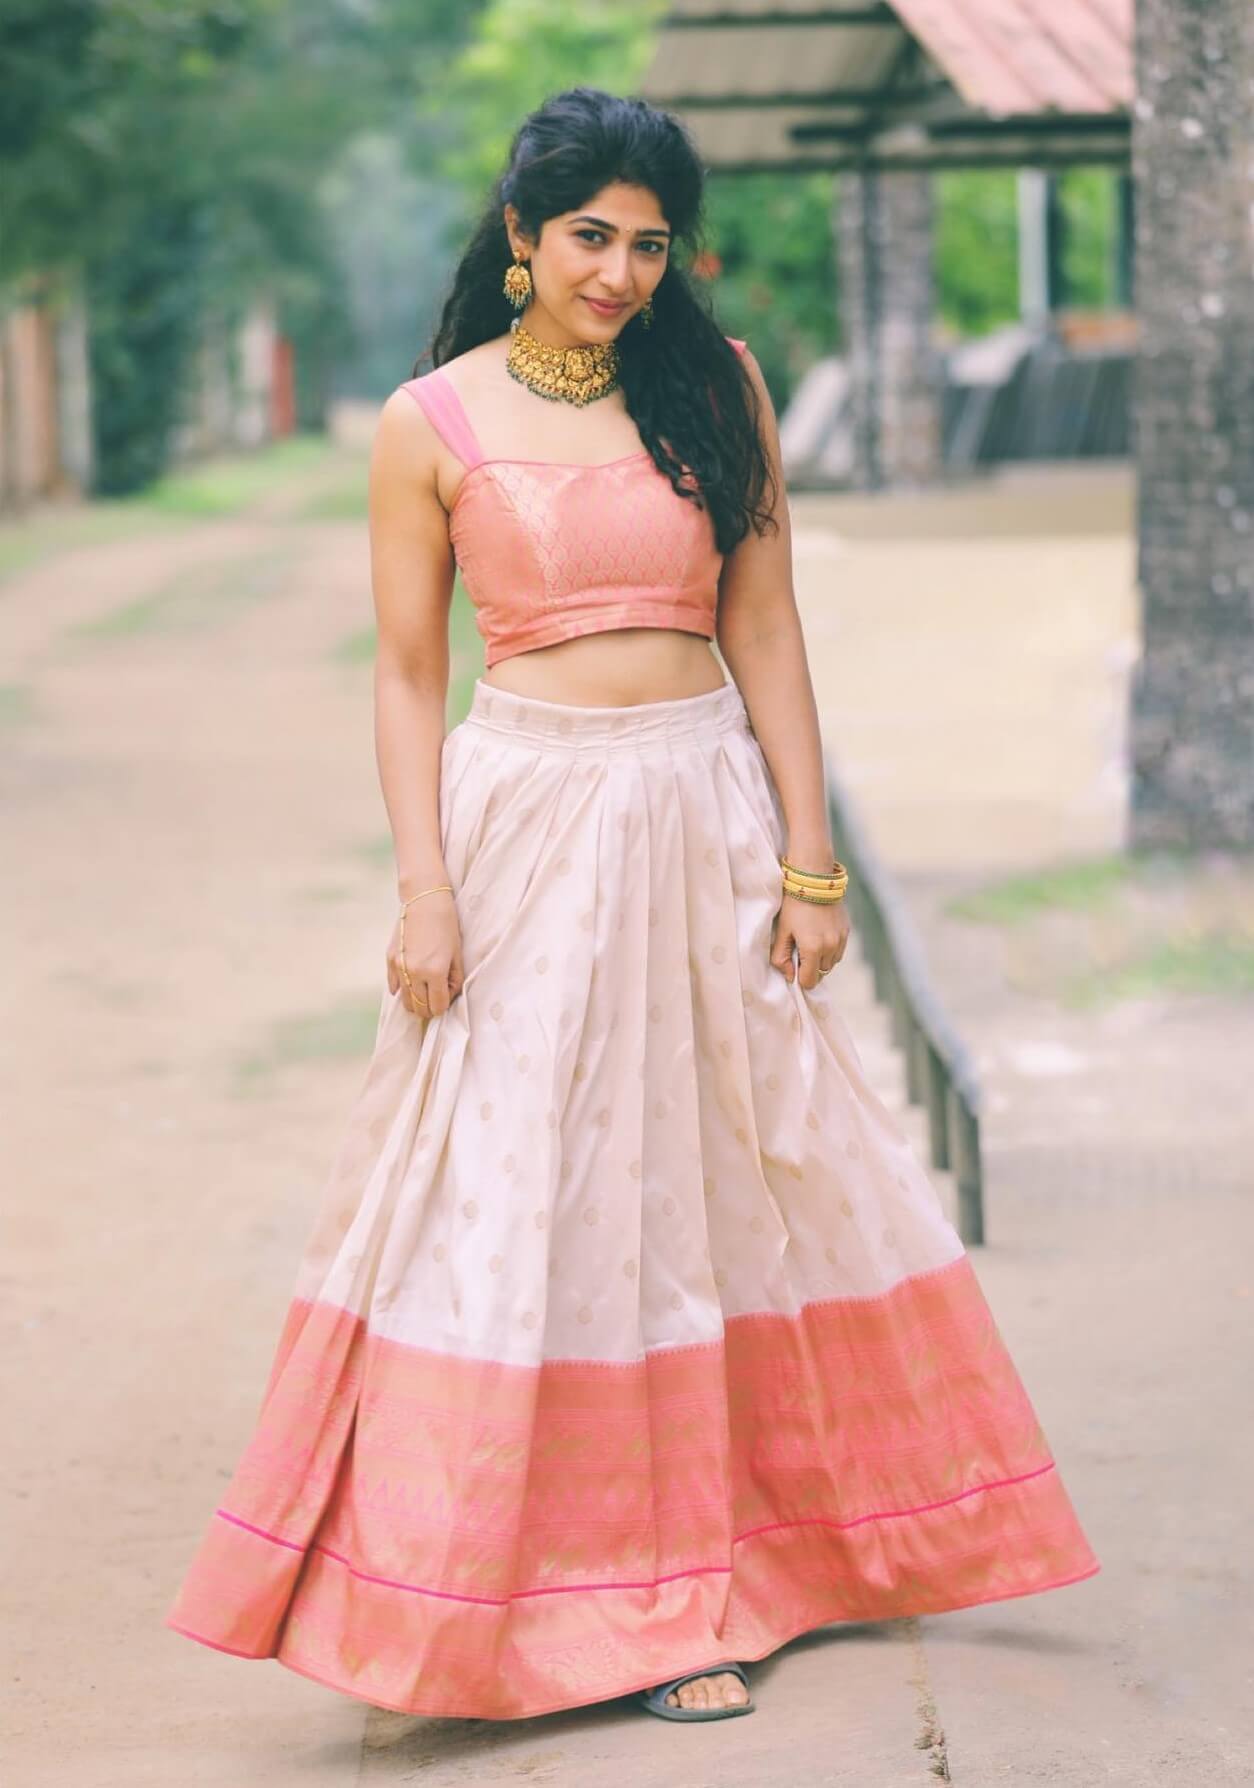 Roshni Prakash Festive Look In Pink Sleeveless Silk Blouse With Off White Silk Skirt Paired With Beautiful Gold Choker Necklace